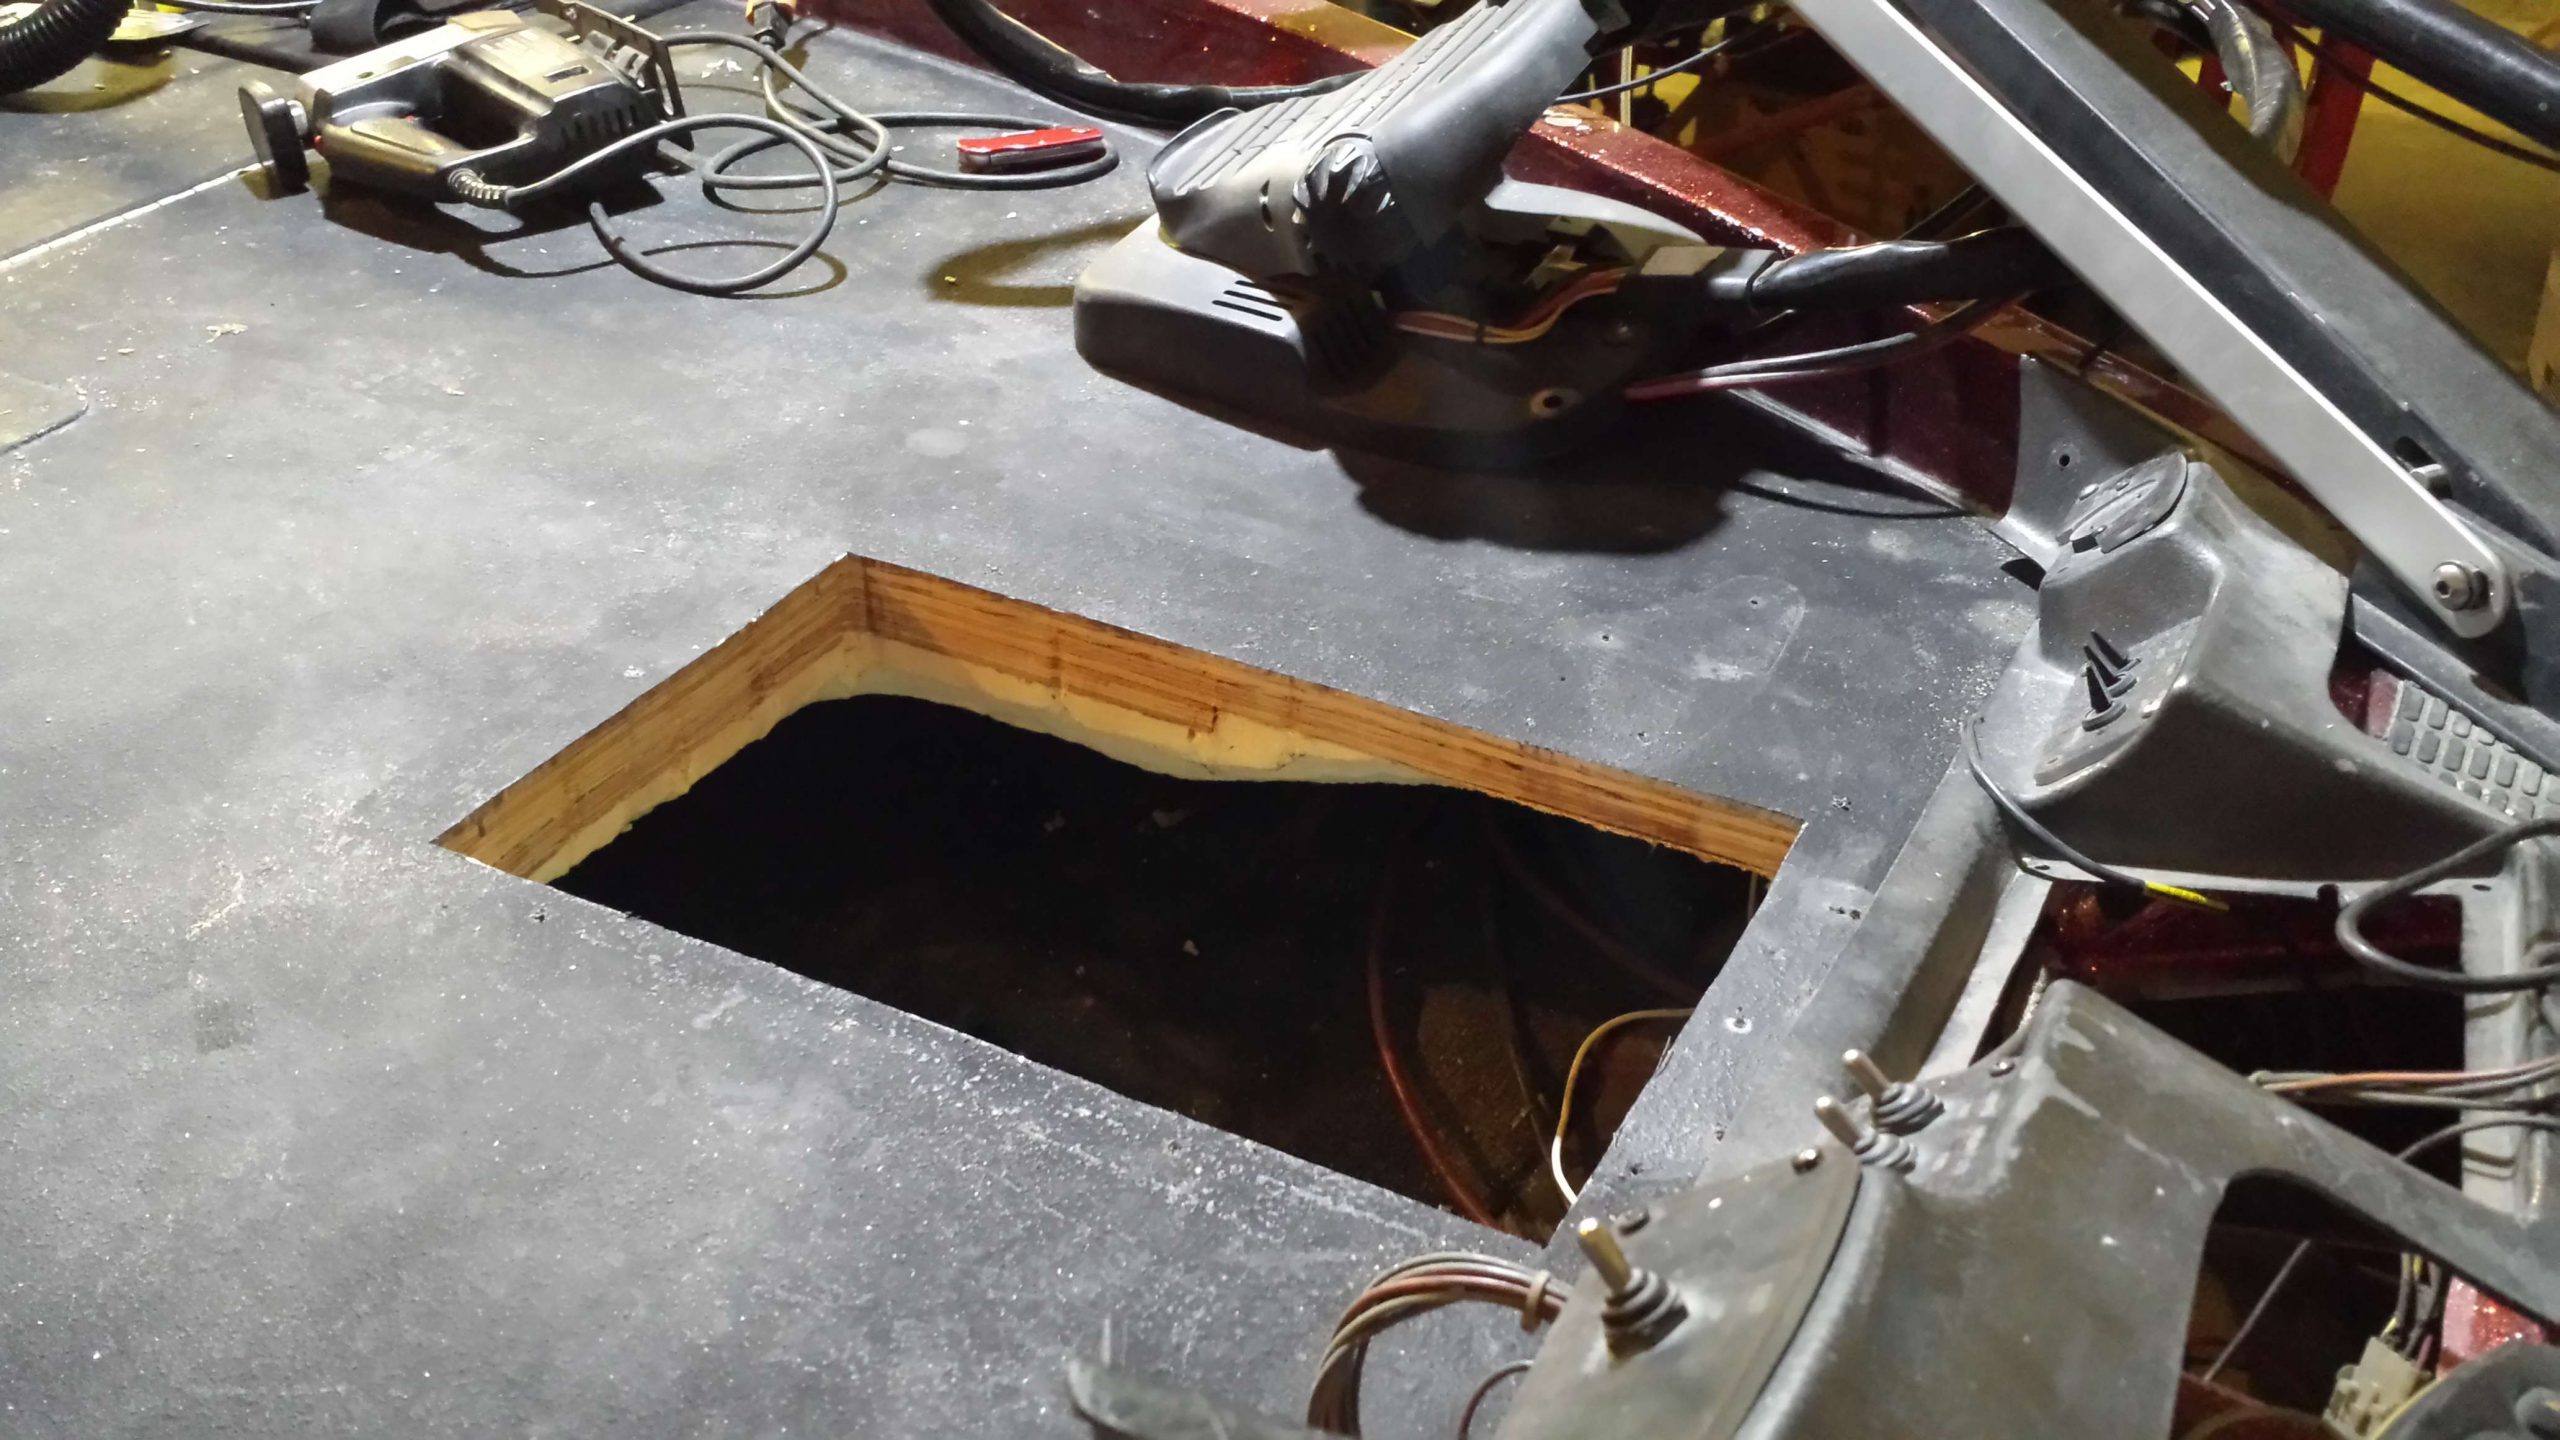 After cutting out the template, I closely examined inside the bow of the boat to make sure no debris was present that could clog the mechanical pumps. Upon finding a few pieces of foam, I used a shop vac to ensure everything was cleaned up.